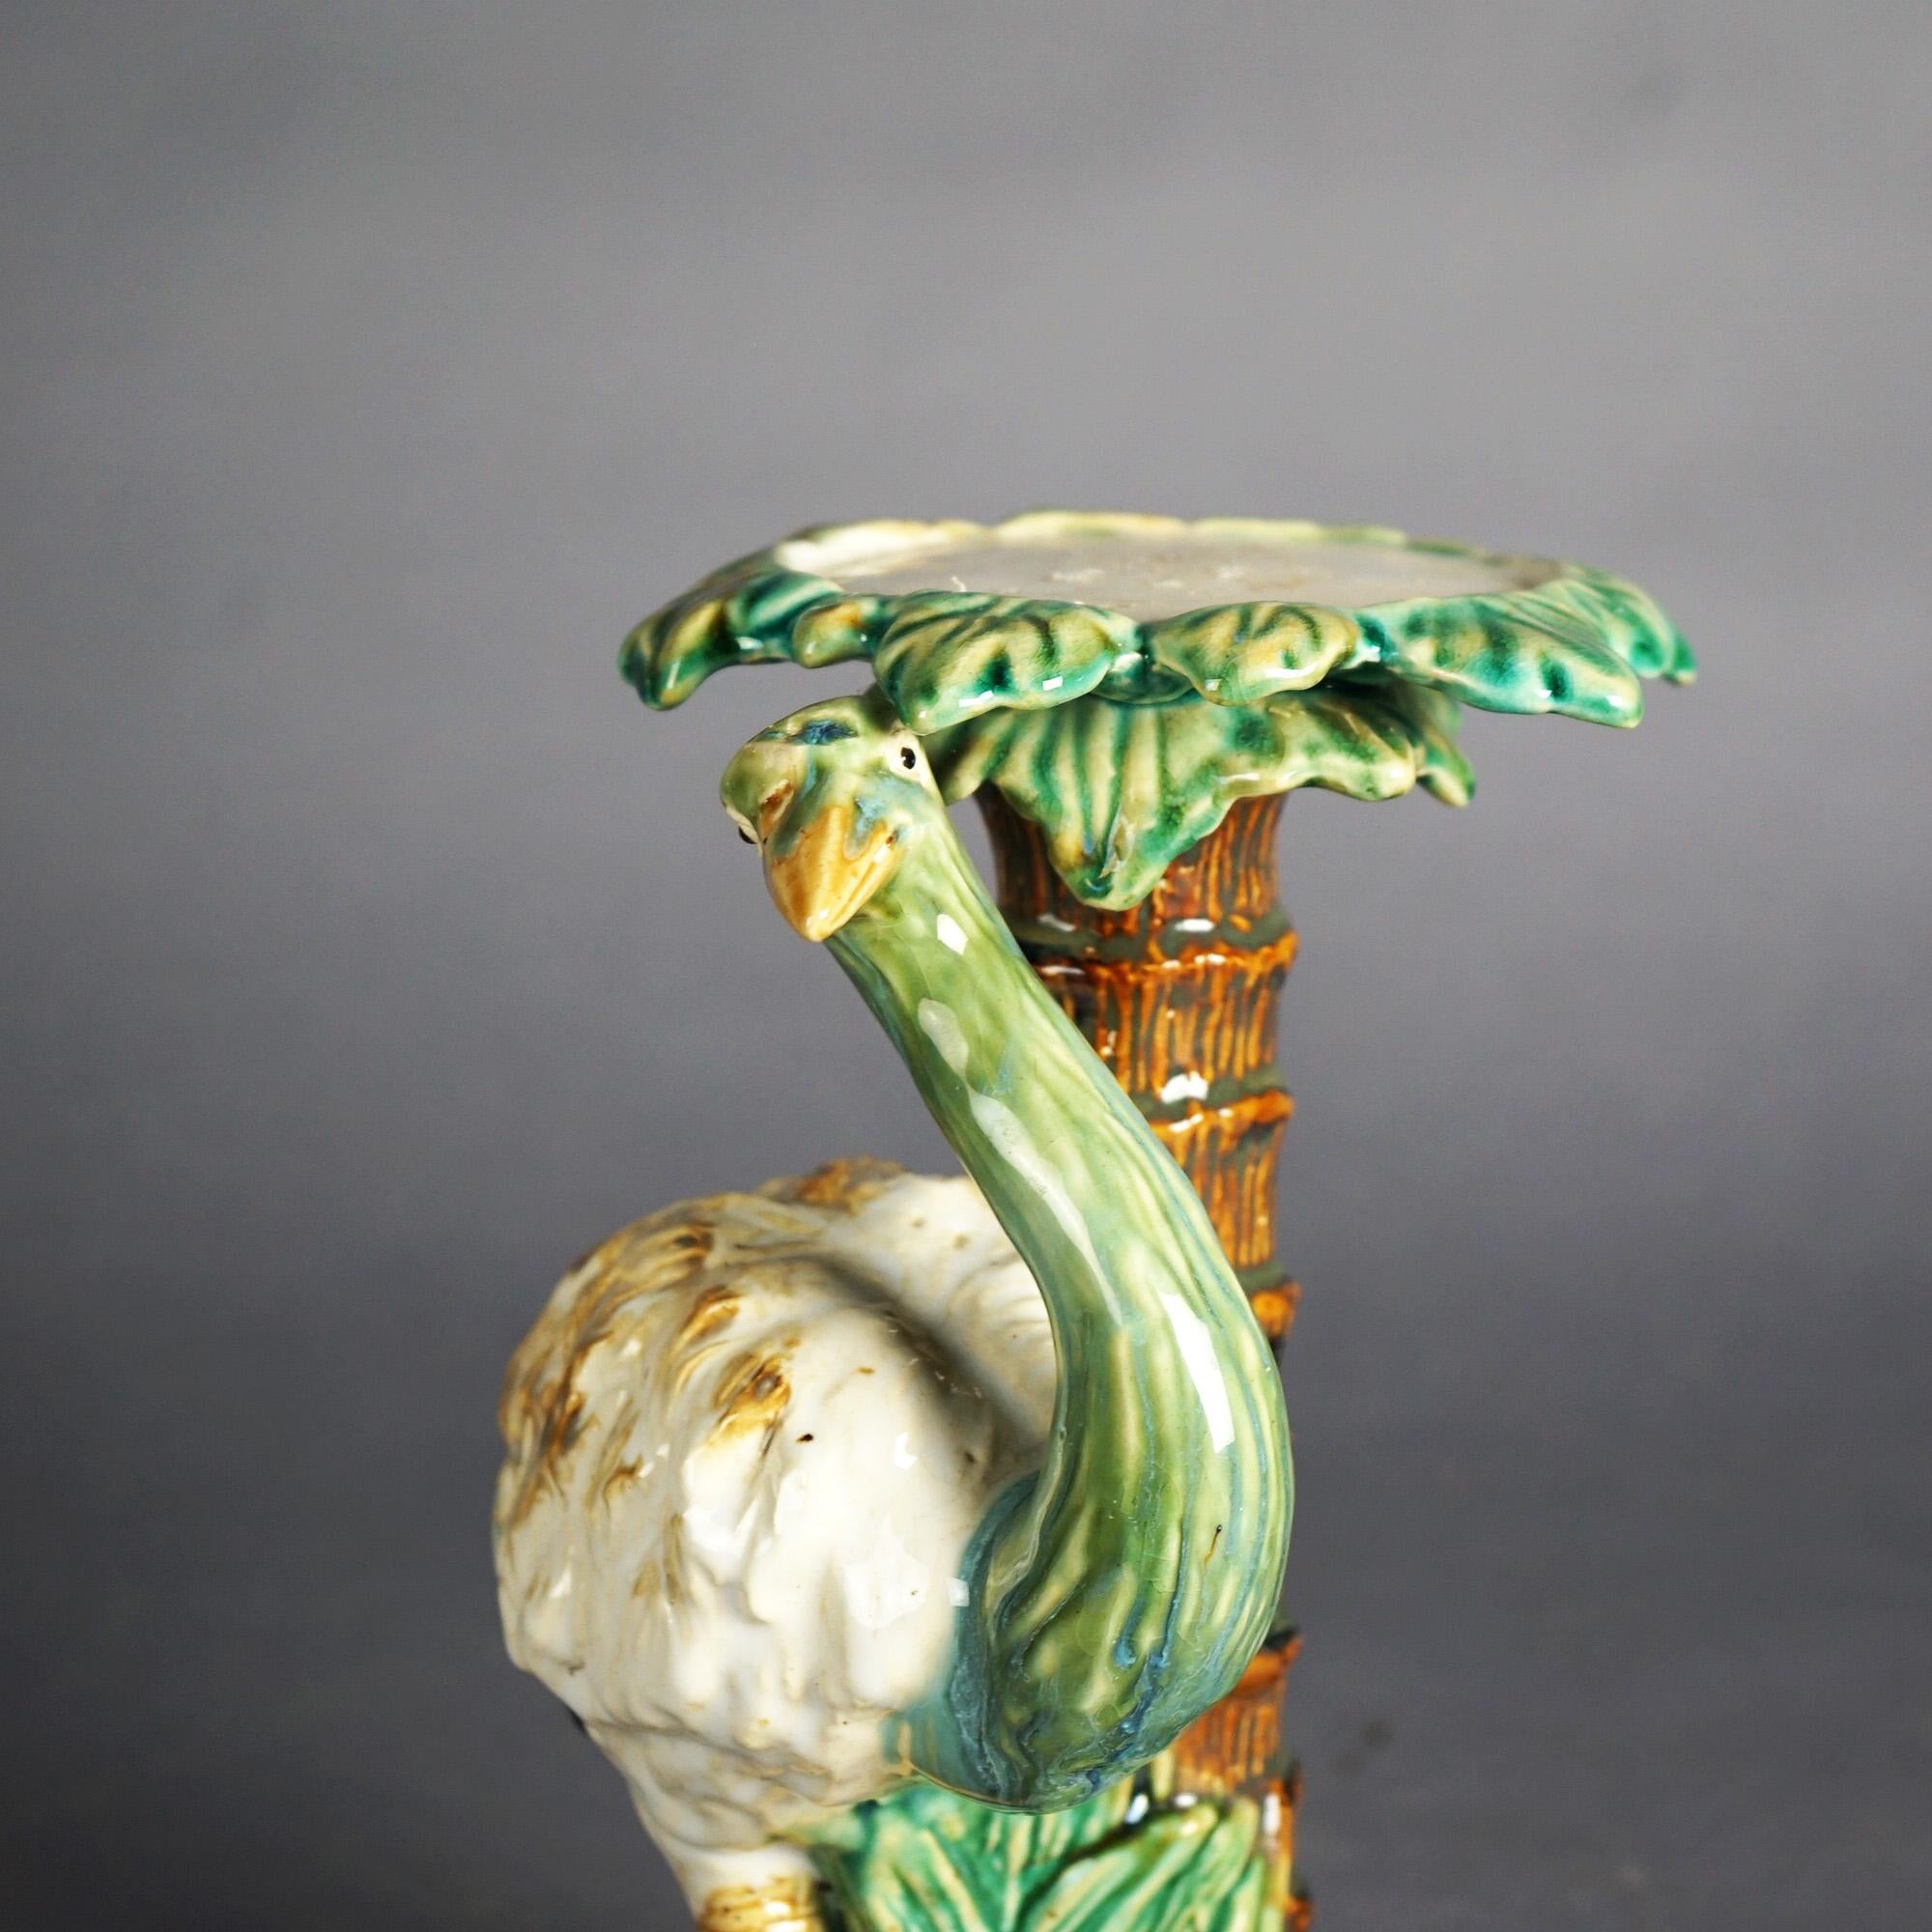 Antique Style Figural Majolica Pottery Crumpet Stand with Emu & Palm Tree, 20thC

Measures - 11